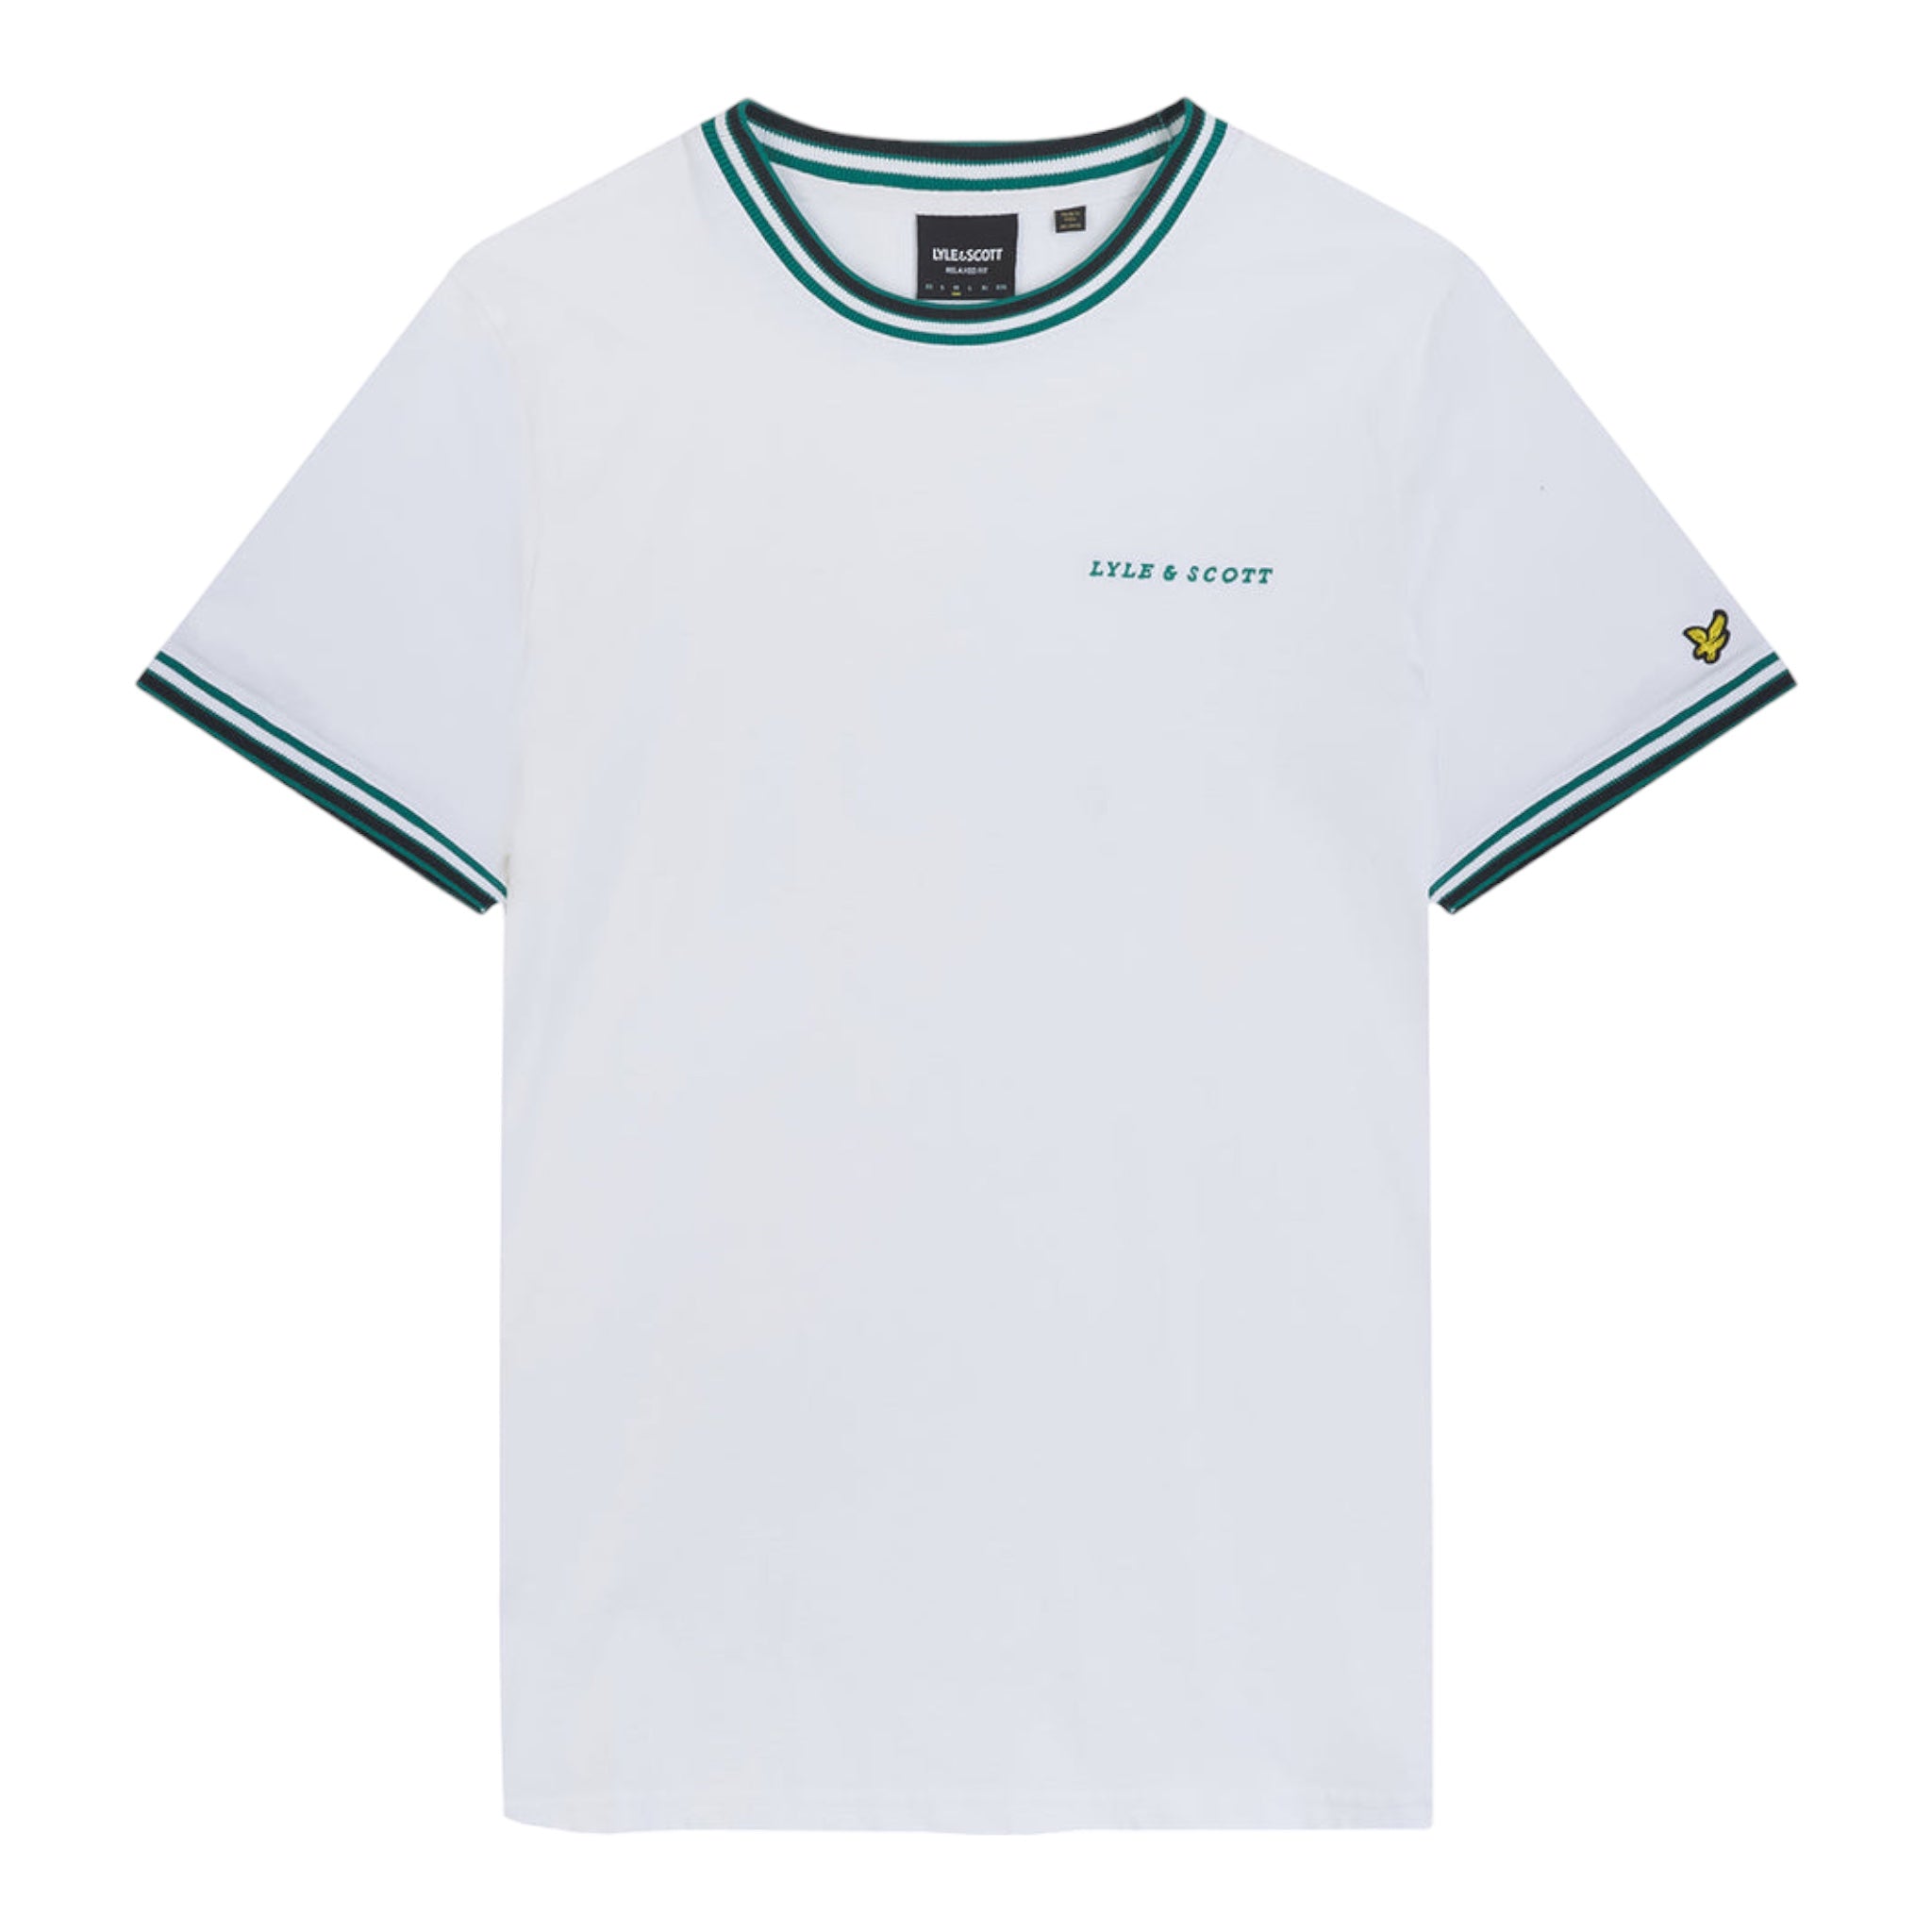 T-Shirt Mens Embroidered Tipped Bianca TS2004V 626